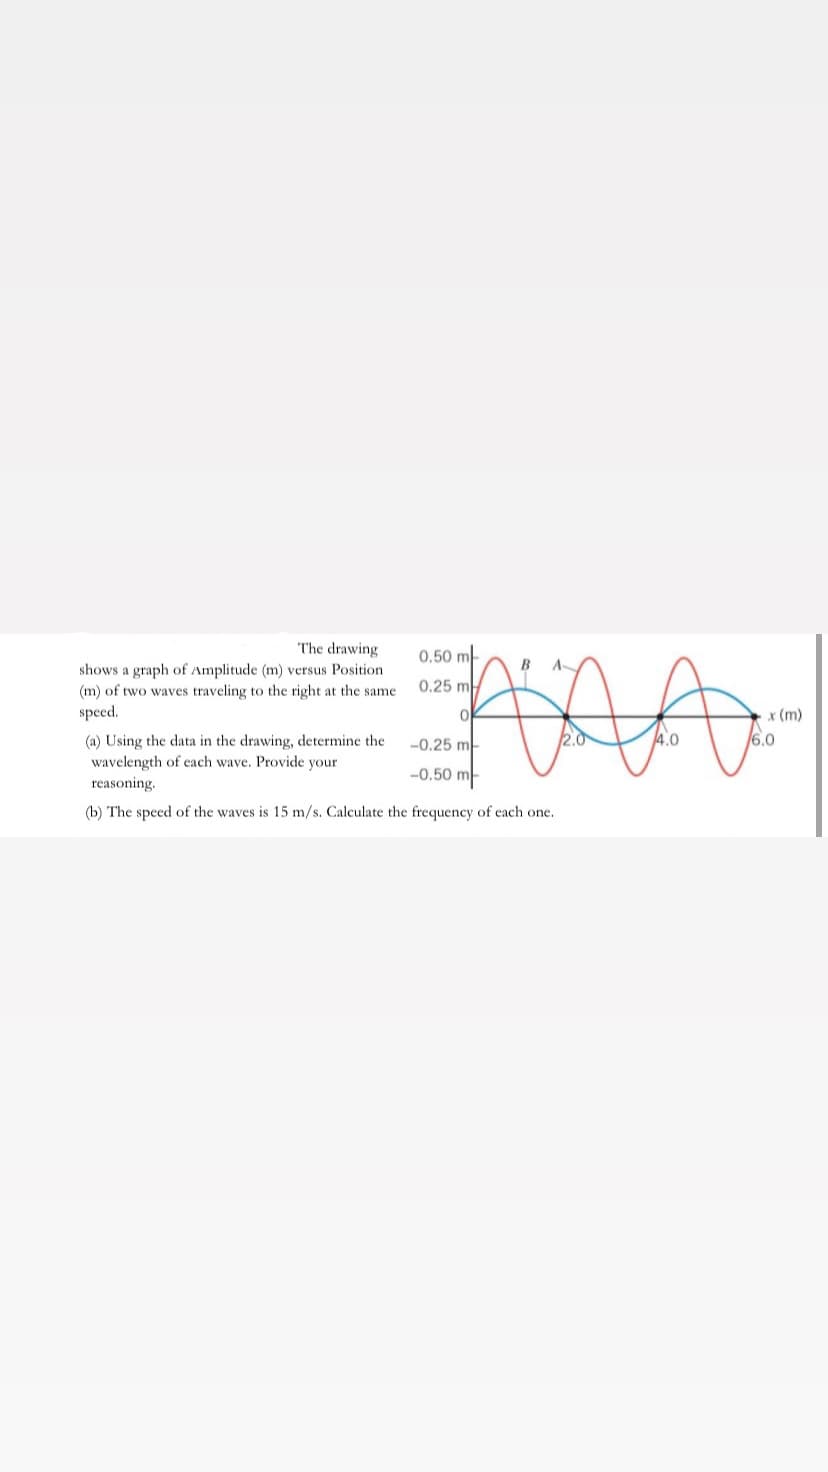 The drawing
0.50 m
A
shows a graph of Amplitude (m) versus Position
(m) of two waves traveling to the right at the same
speed.
0.25 m
x (m)
2.0
4.0
6.0
(a) Using the data in the drawing, determine the
wavelength of each wave. Provide your
reasoning.
-0.25 m-
-0.50 m
(b) The speed of the waves is 15 m/s. Calculate the frequency of each one.
